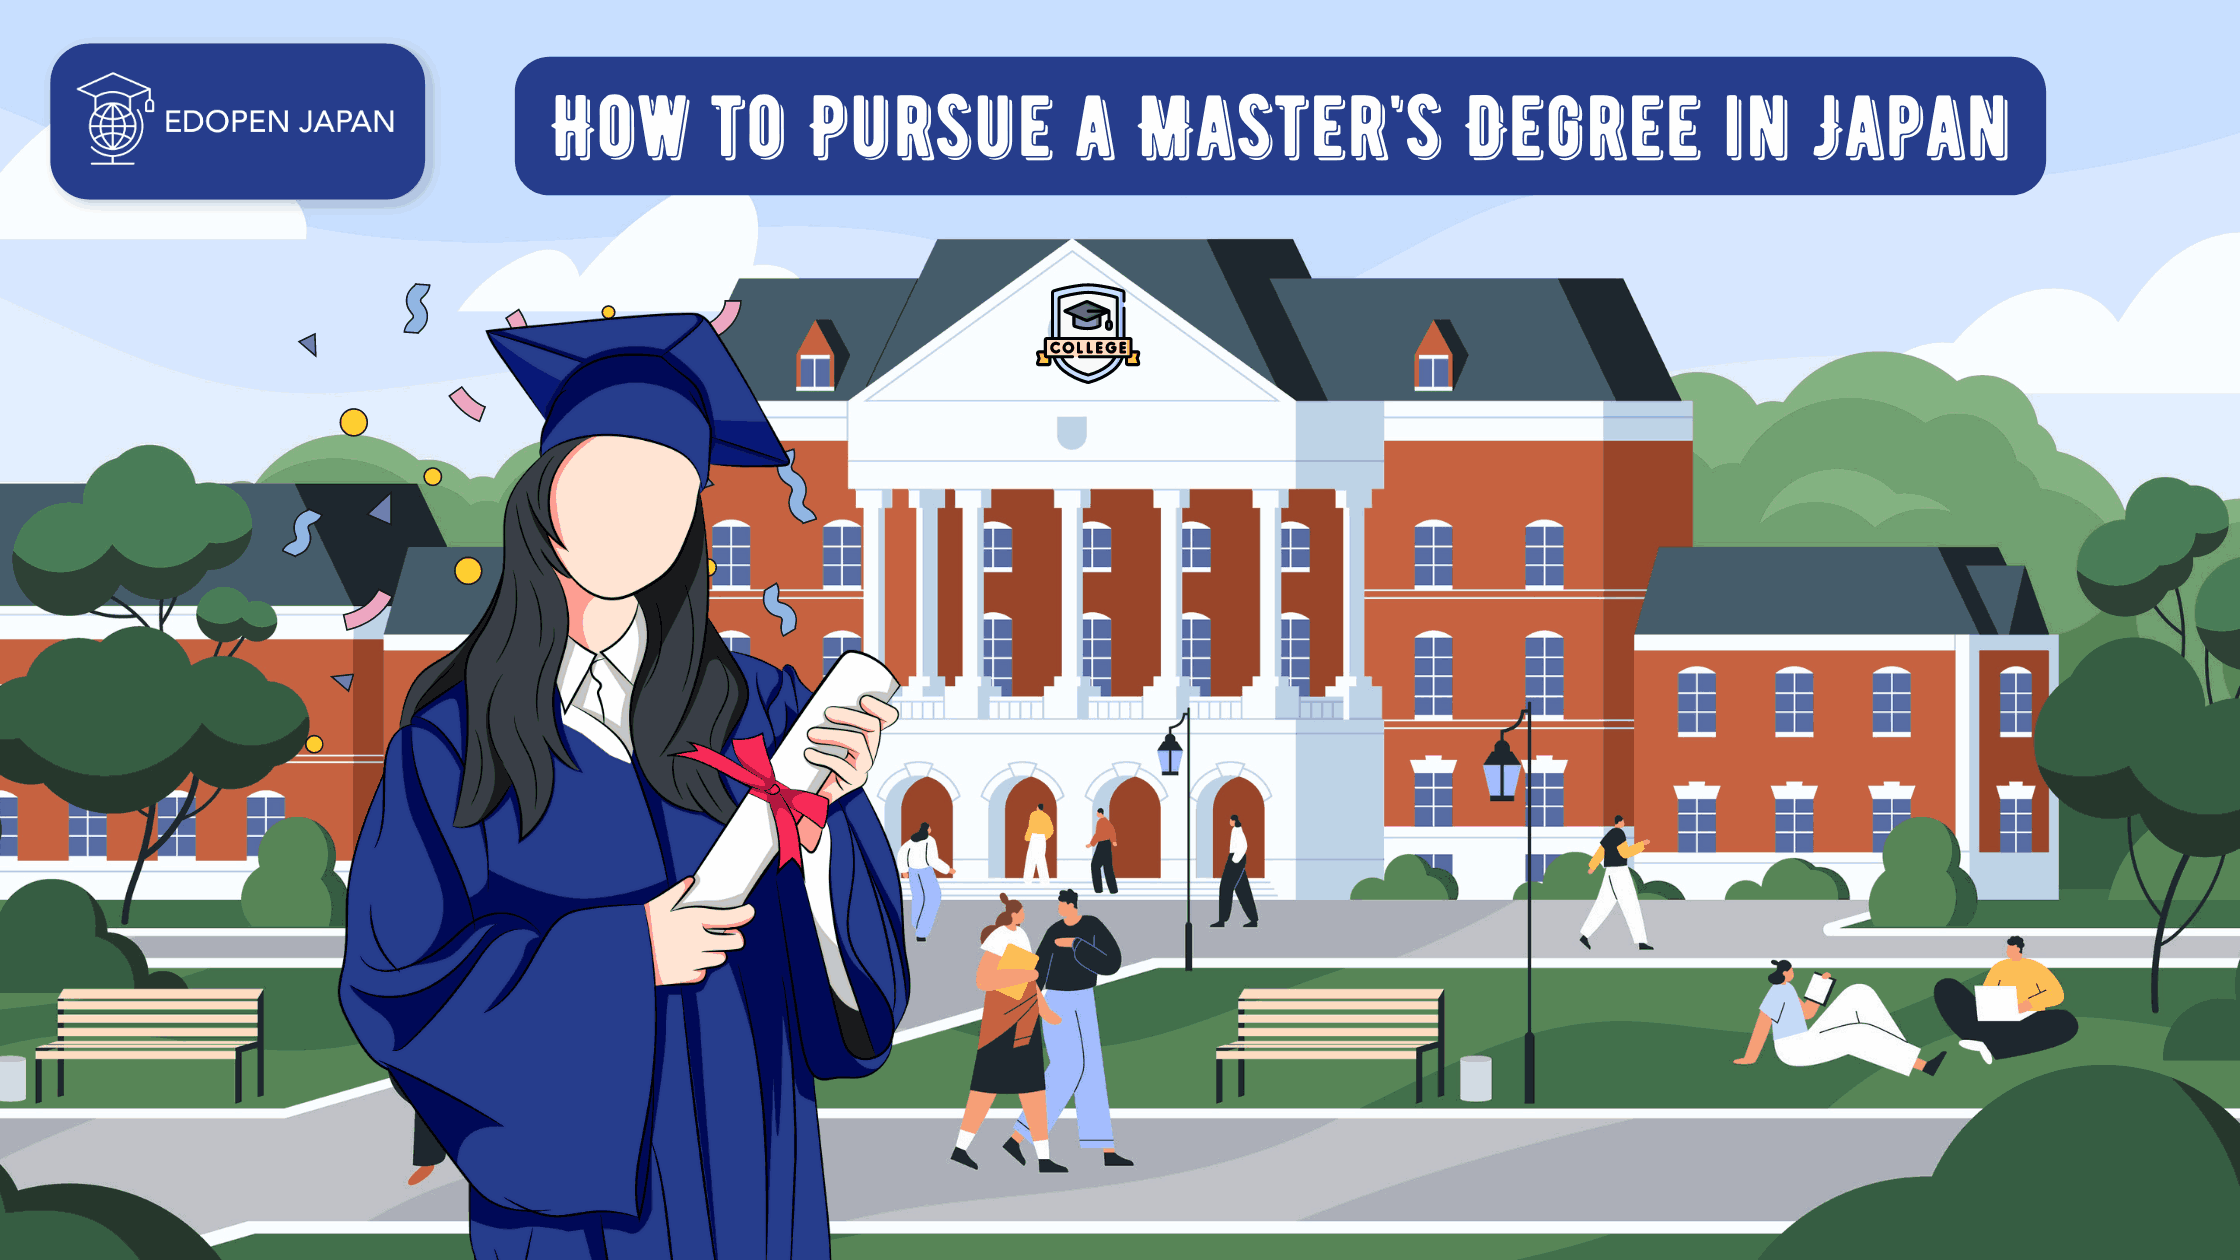 How to Pursue a Master's Degree in Japan - EDOPEN Japan